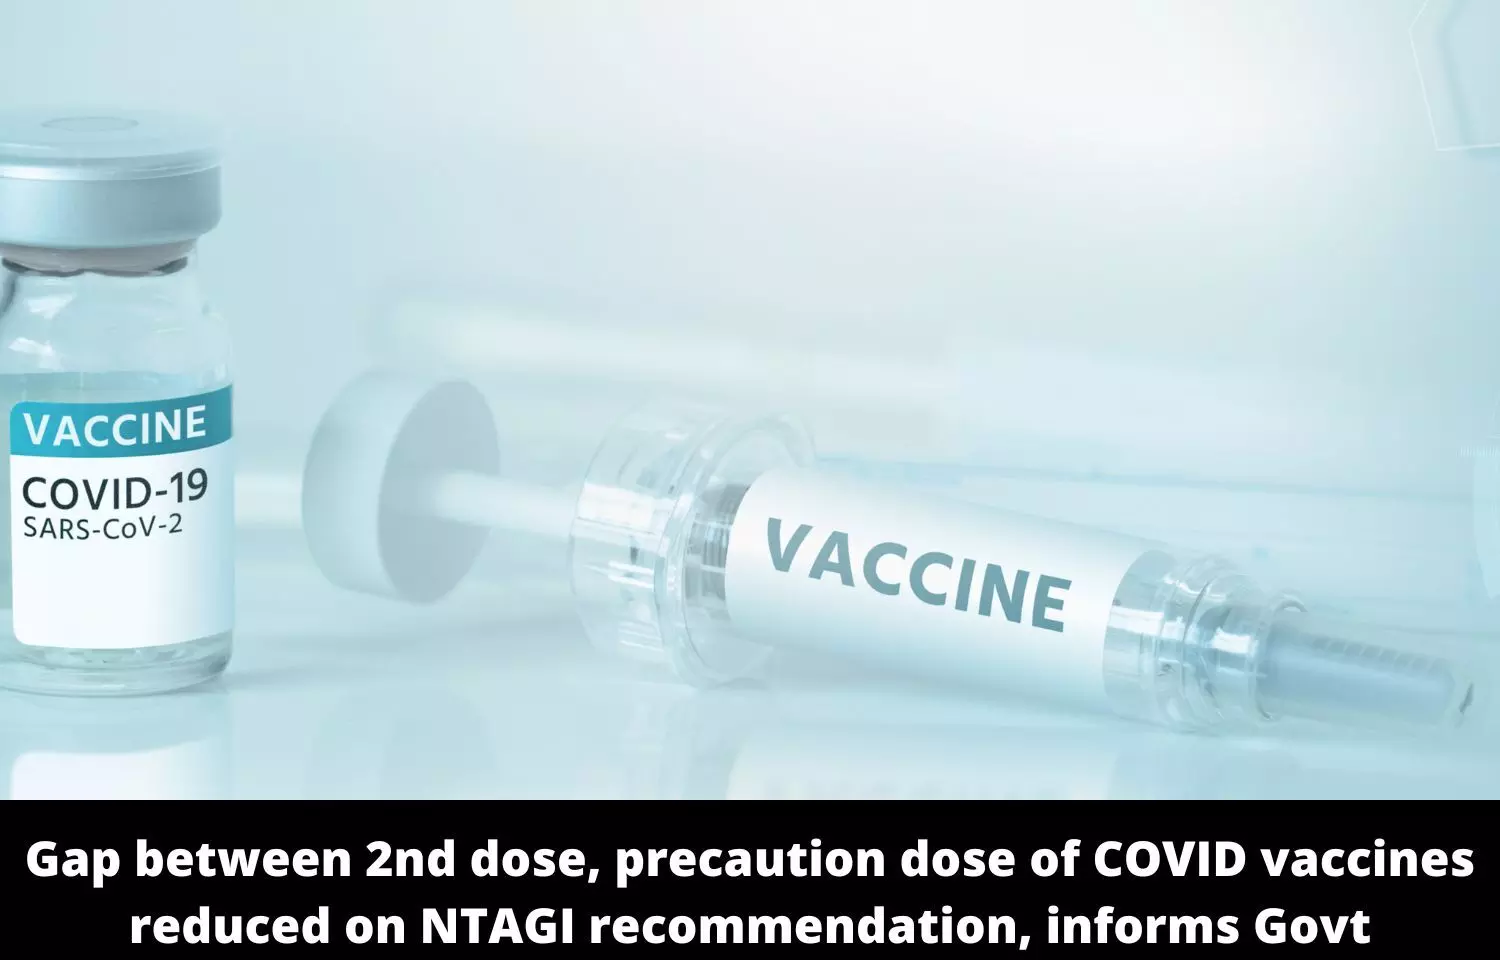 Gap between 2nd dose, precaution dose of COVID vaccines reduced on NTAGI recommendation, informs Govt